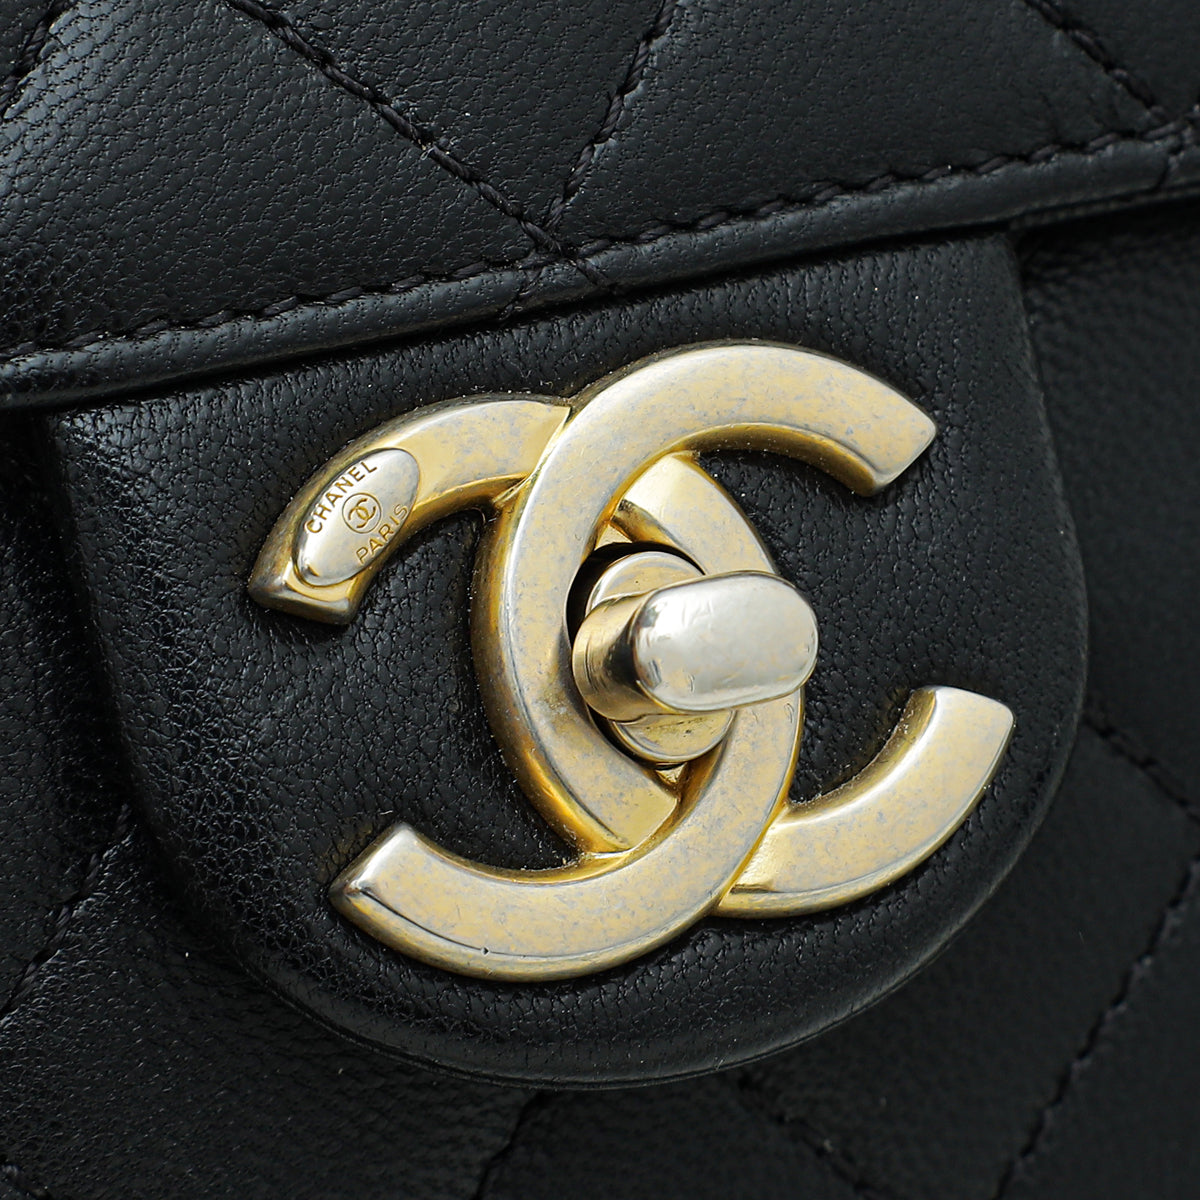 Chanel Chic Pearls Flap Quilted Calfskin Leather Shoulder Bag Black